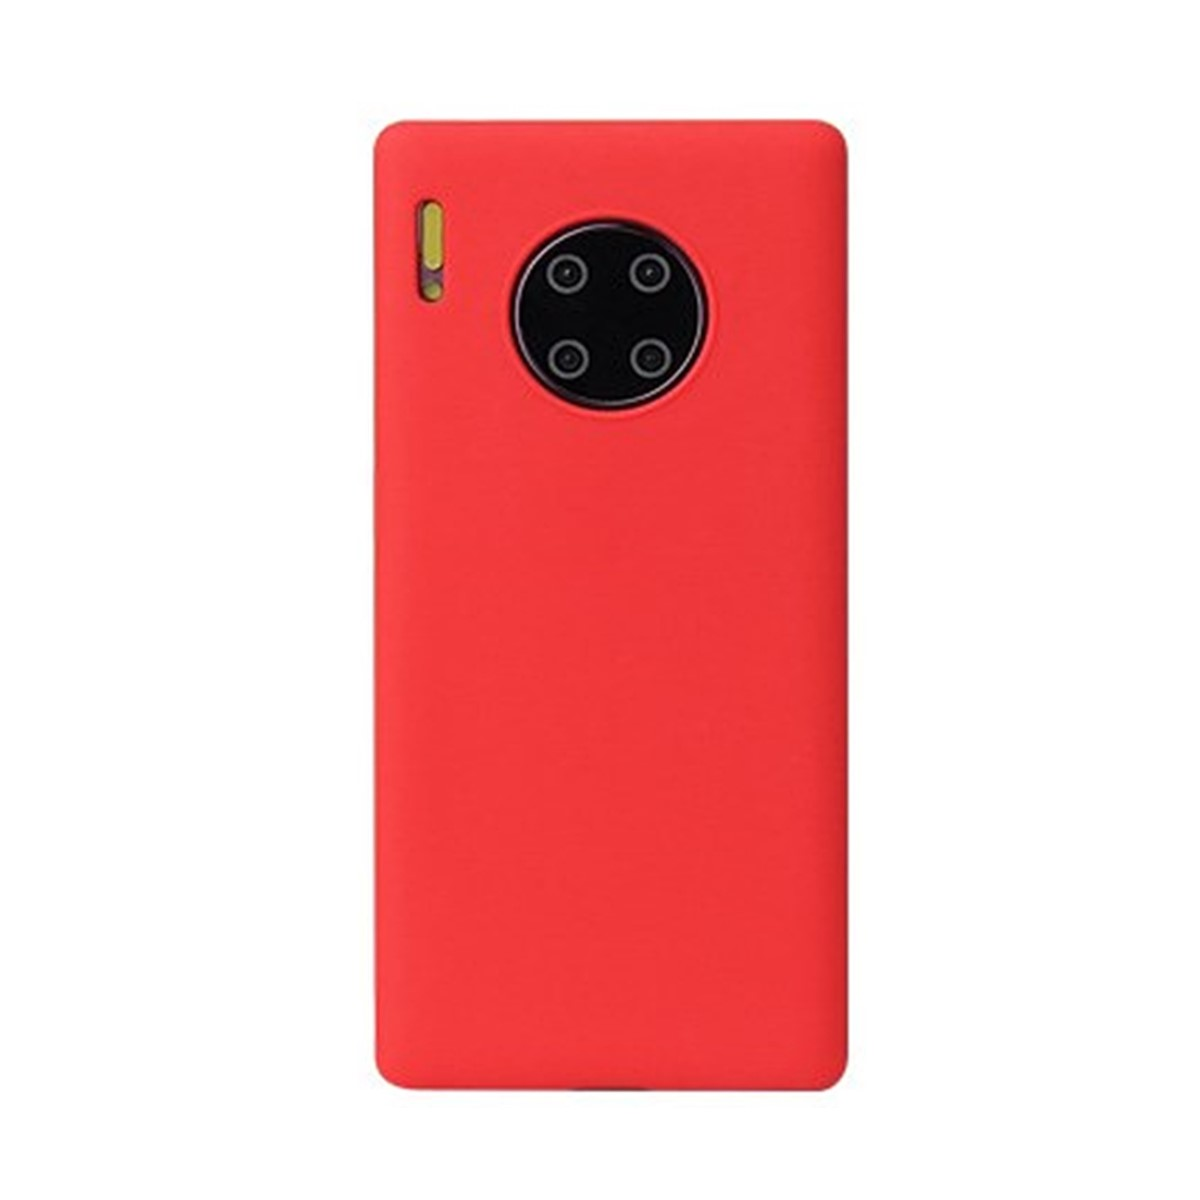 Pro, Huawei, aus Handycase 30 Backcover, Rot Silikon, COVERKINGZ Mate